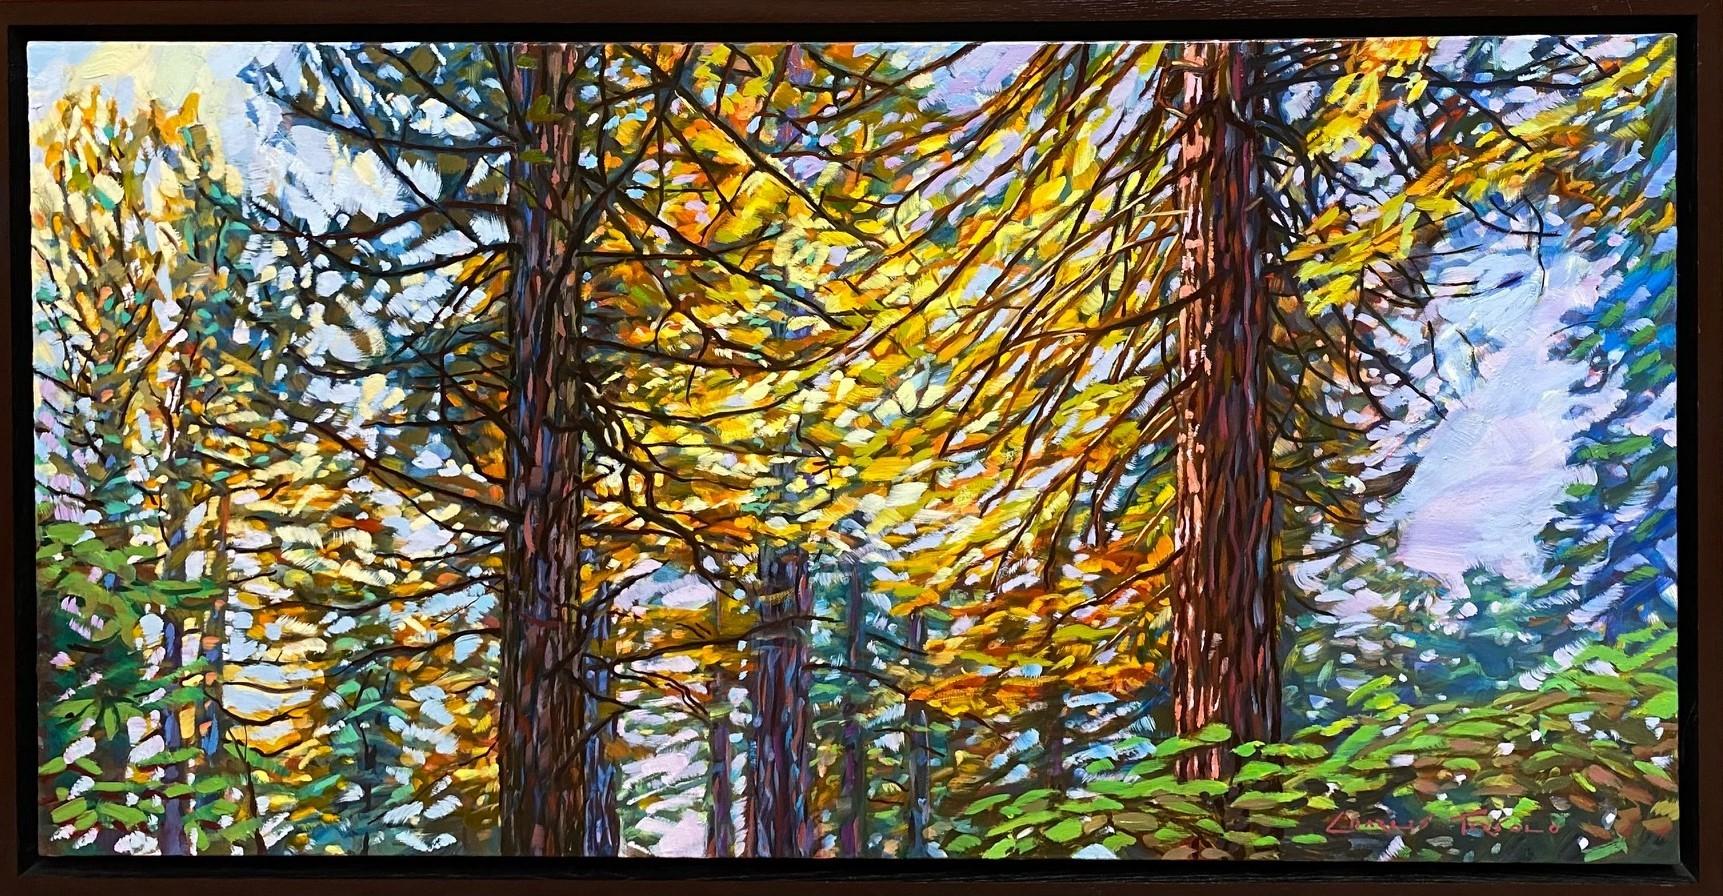 Charles Tersolo Landscape Painting - Muir Woods, California original 24x48 expressionist landscape